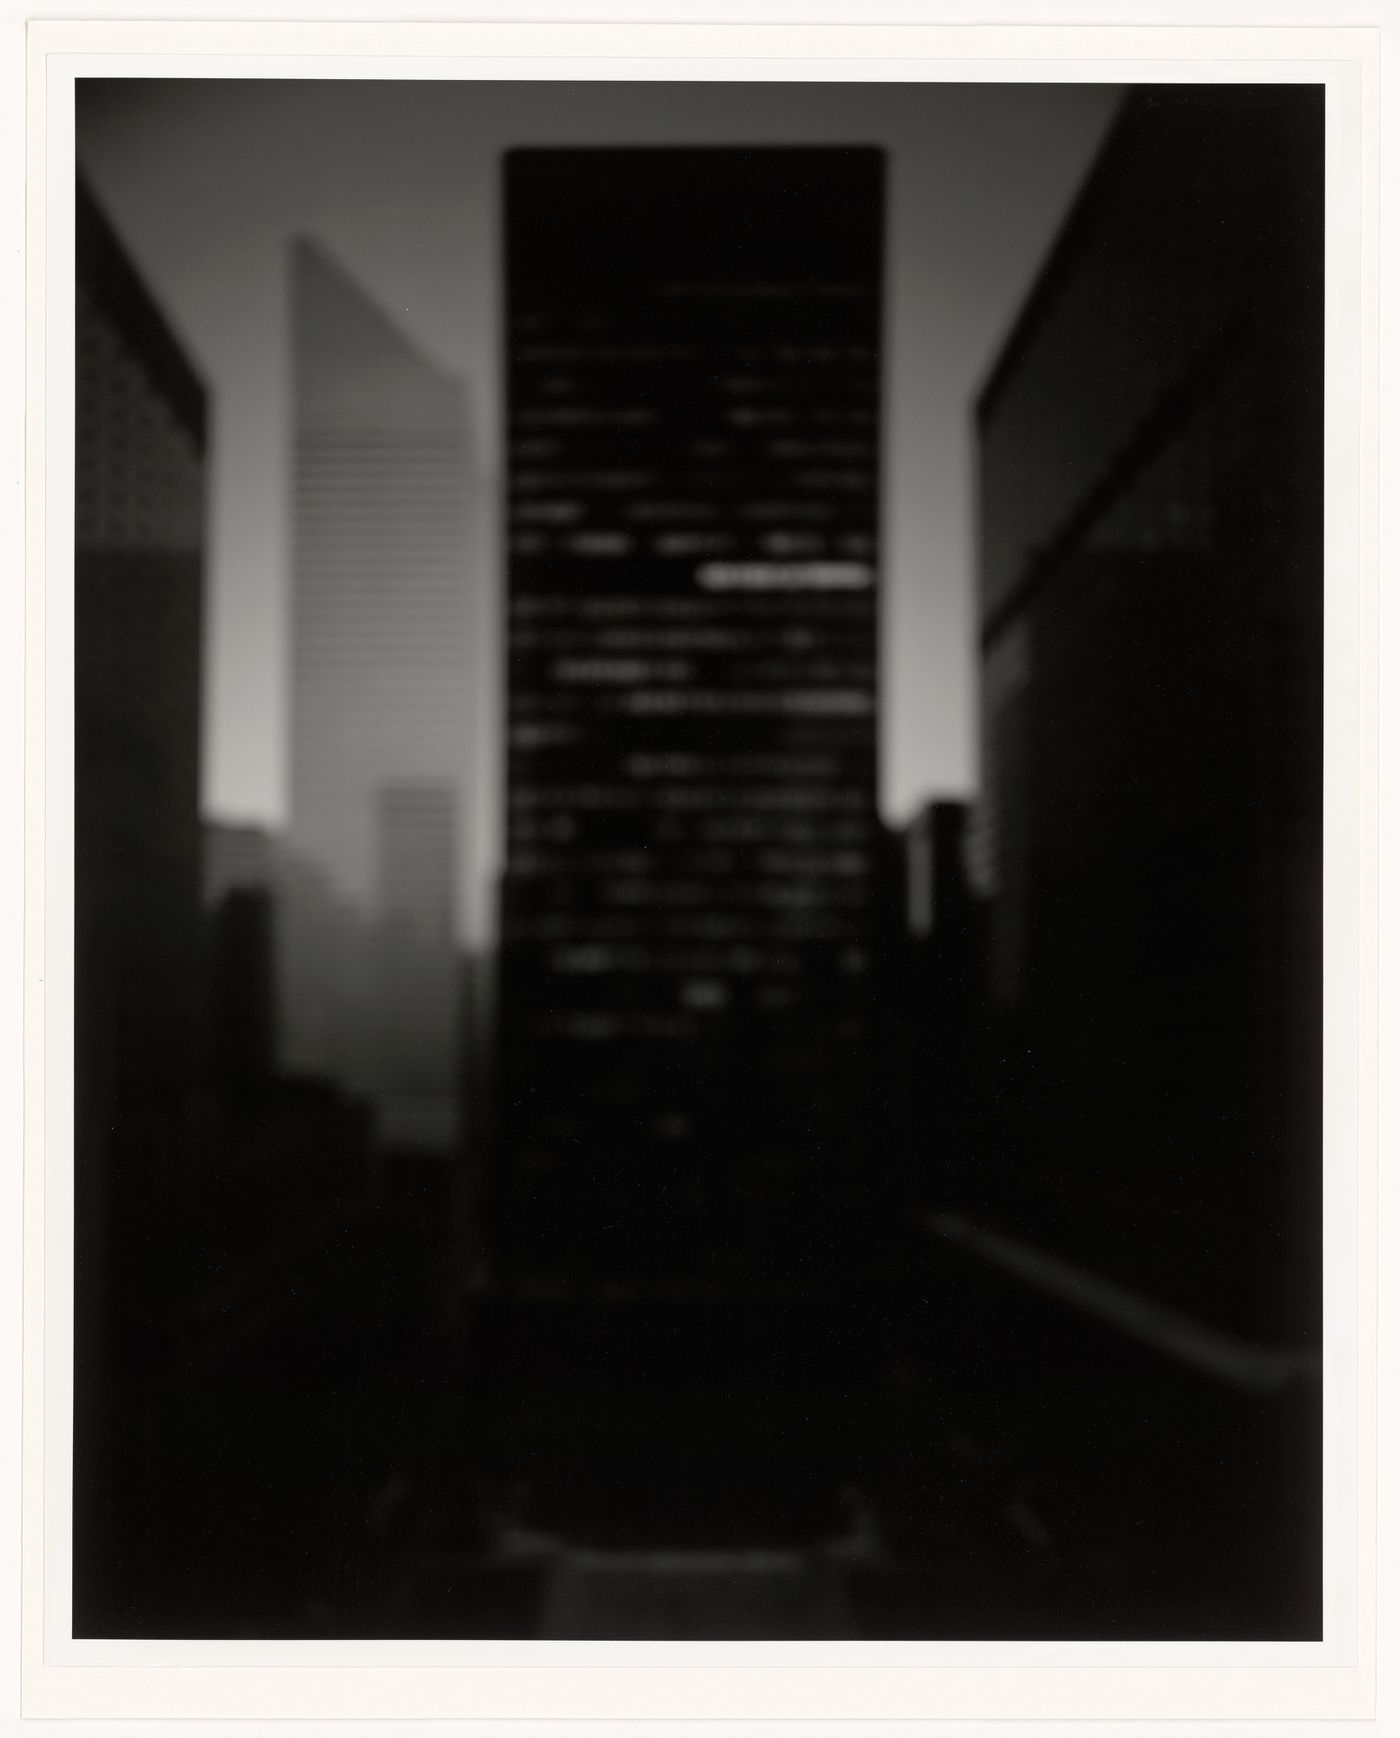 "Seagram Building", New York City, New York, United States, form the series "Modernism"